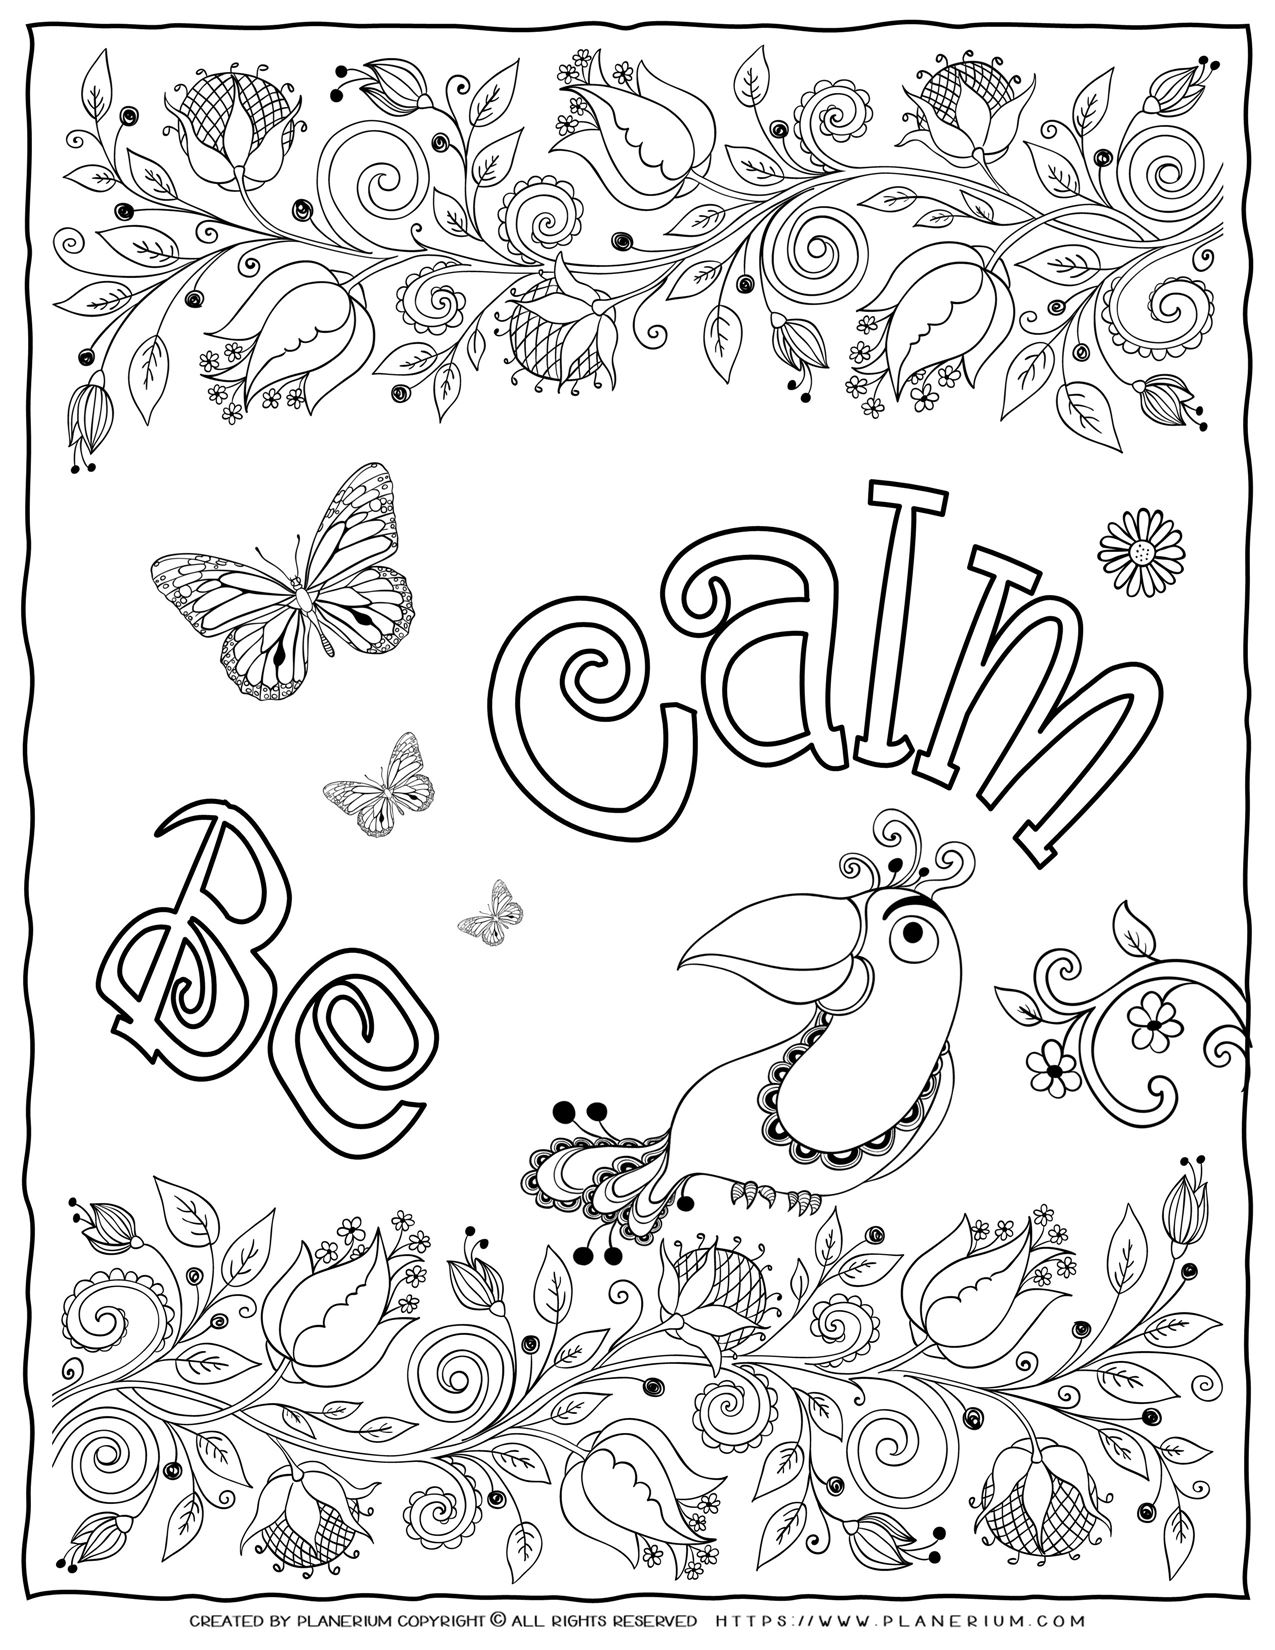 Colour Calm Sampler Adult Coloring Pages Samplers Doodles Calm | The ...